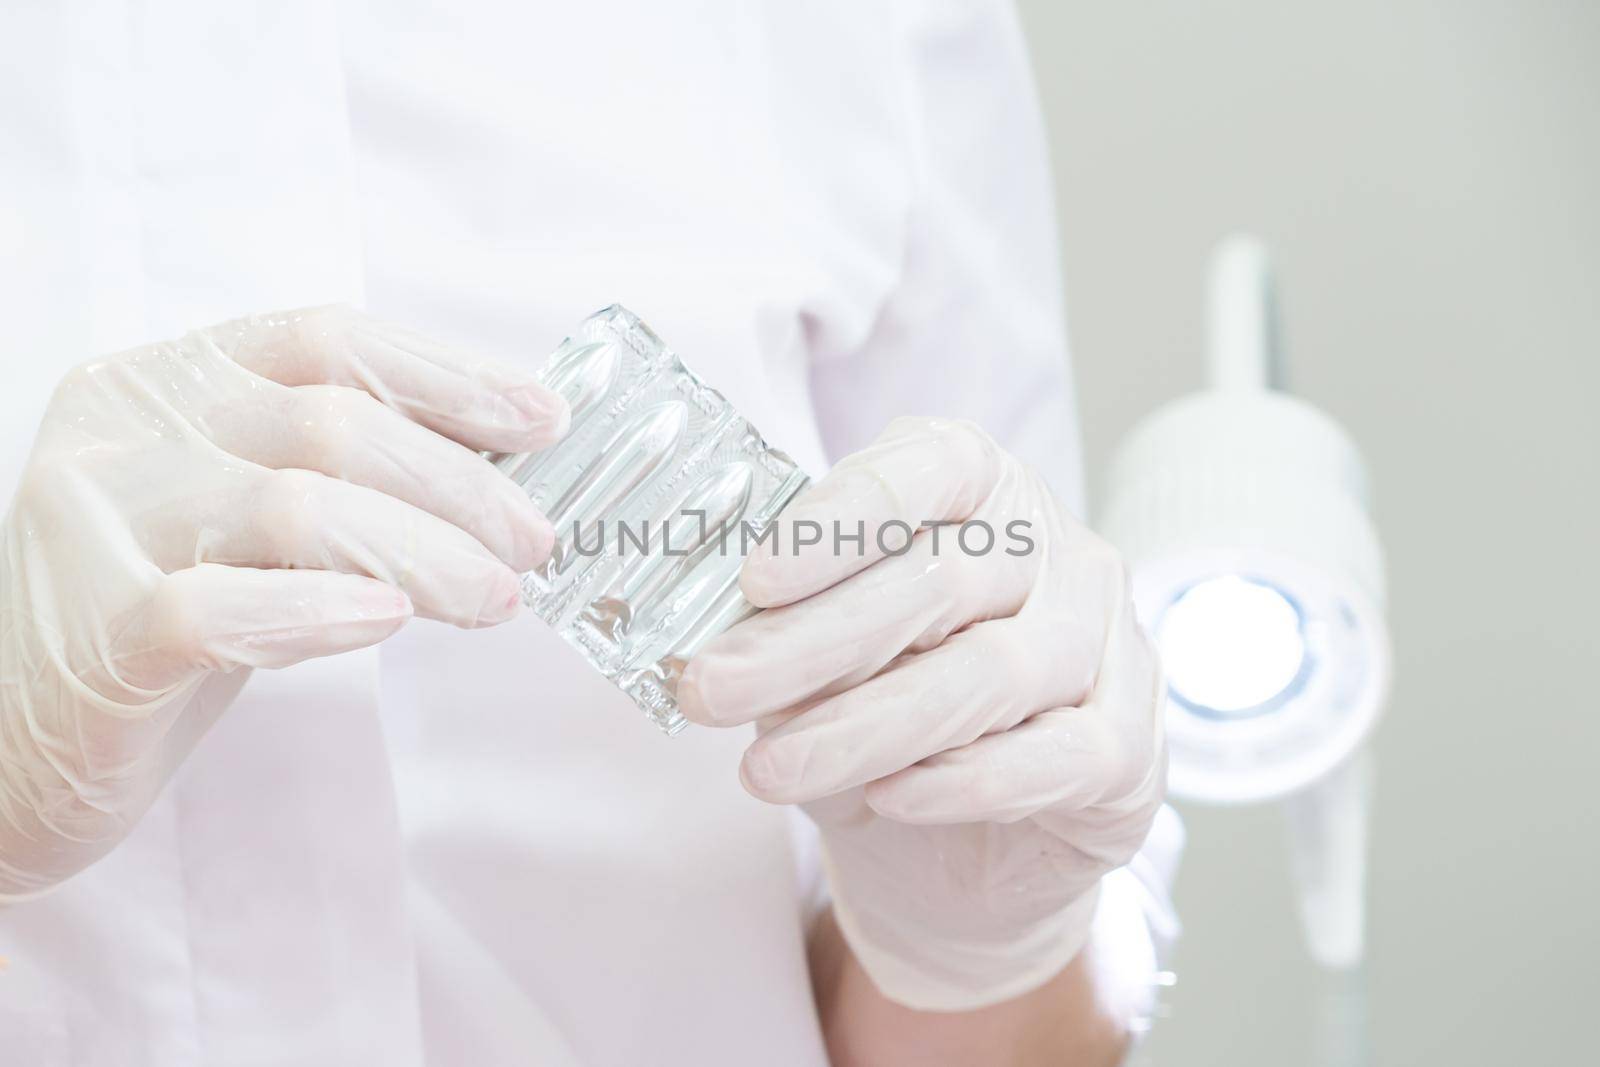 Doctor wearing white medical gloves holding a pack of suppositories